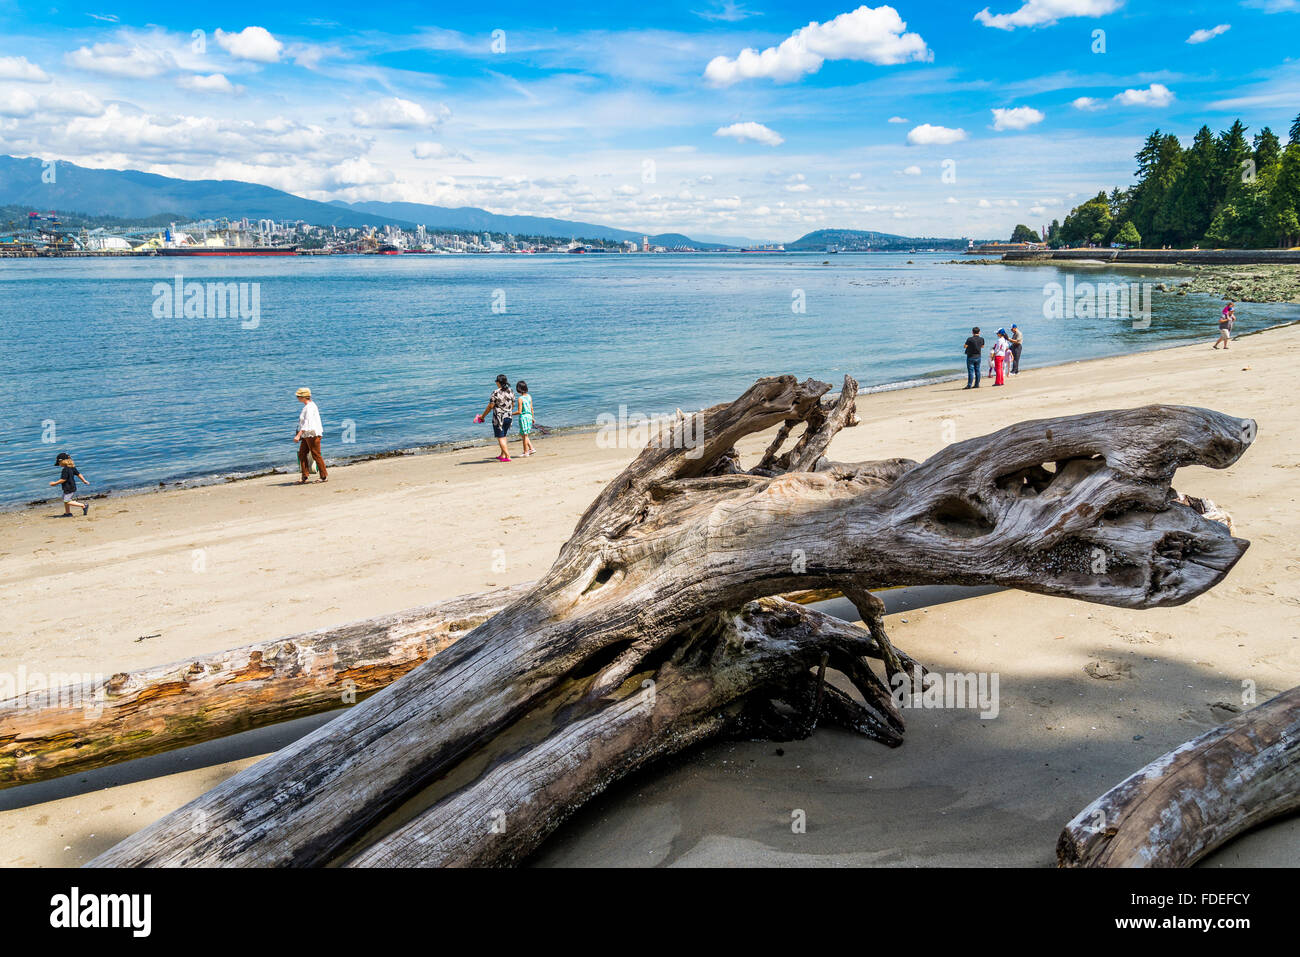 Driftwood logs on beach at Stanley Park, Vancouver, British Columbia, Canada Stock Photo